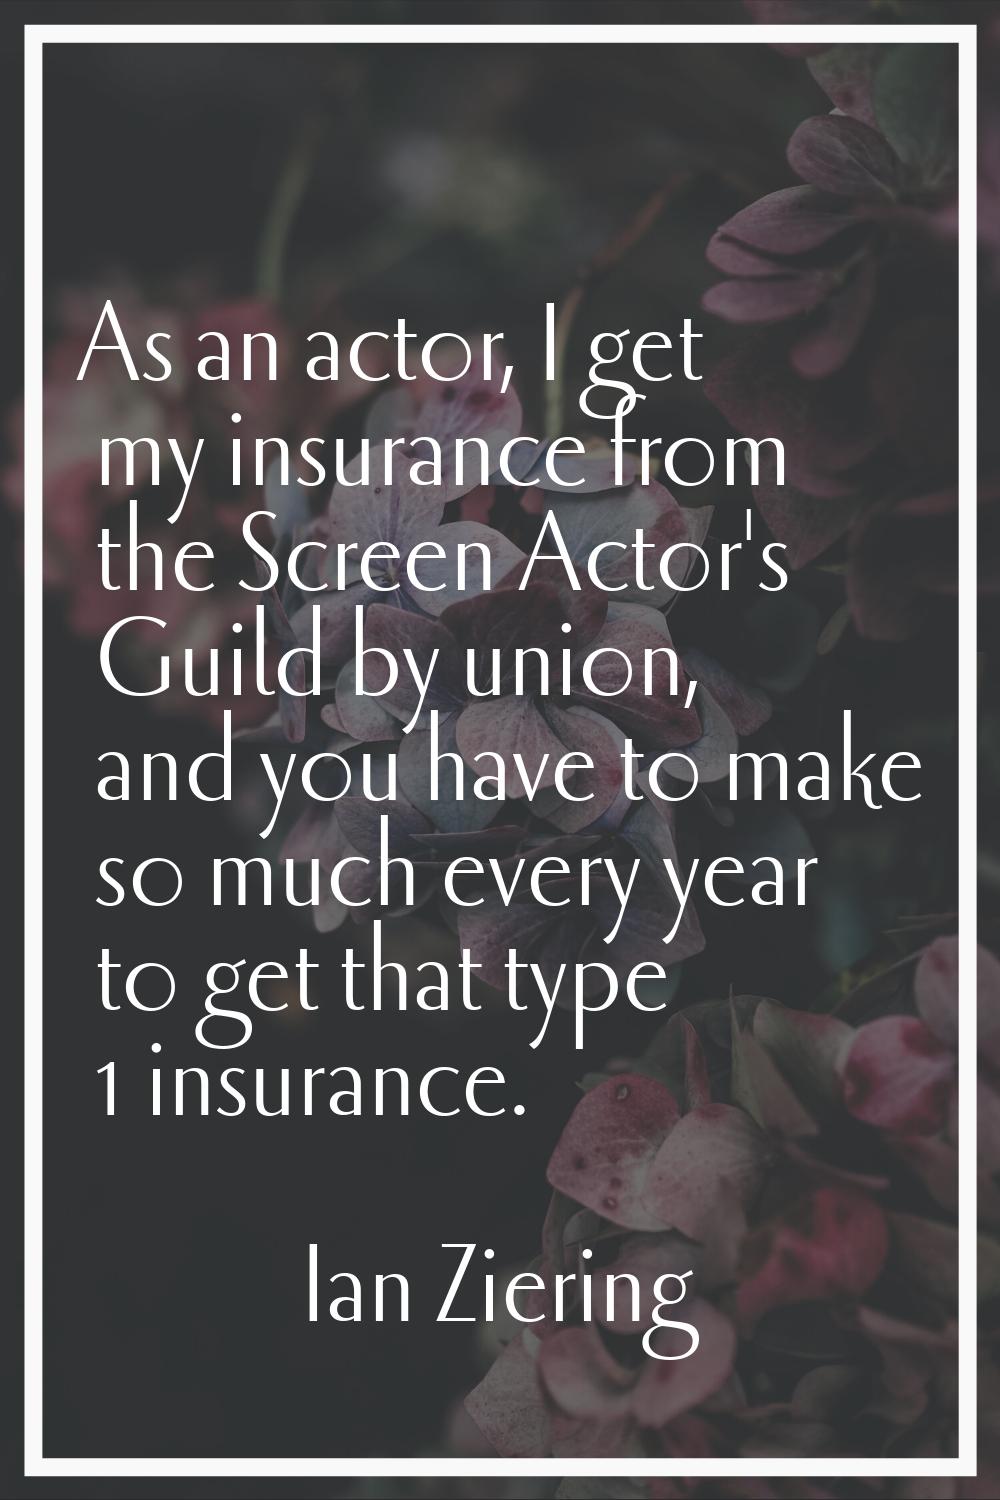 As an actor, I get my insurance from the Screen Actor's Guild by union, and you have to make so muc